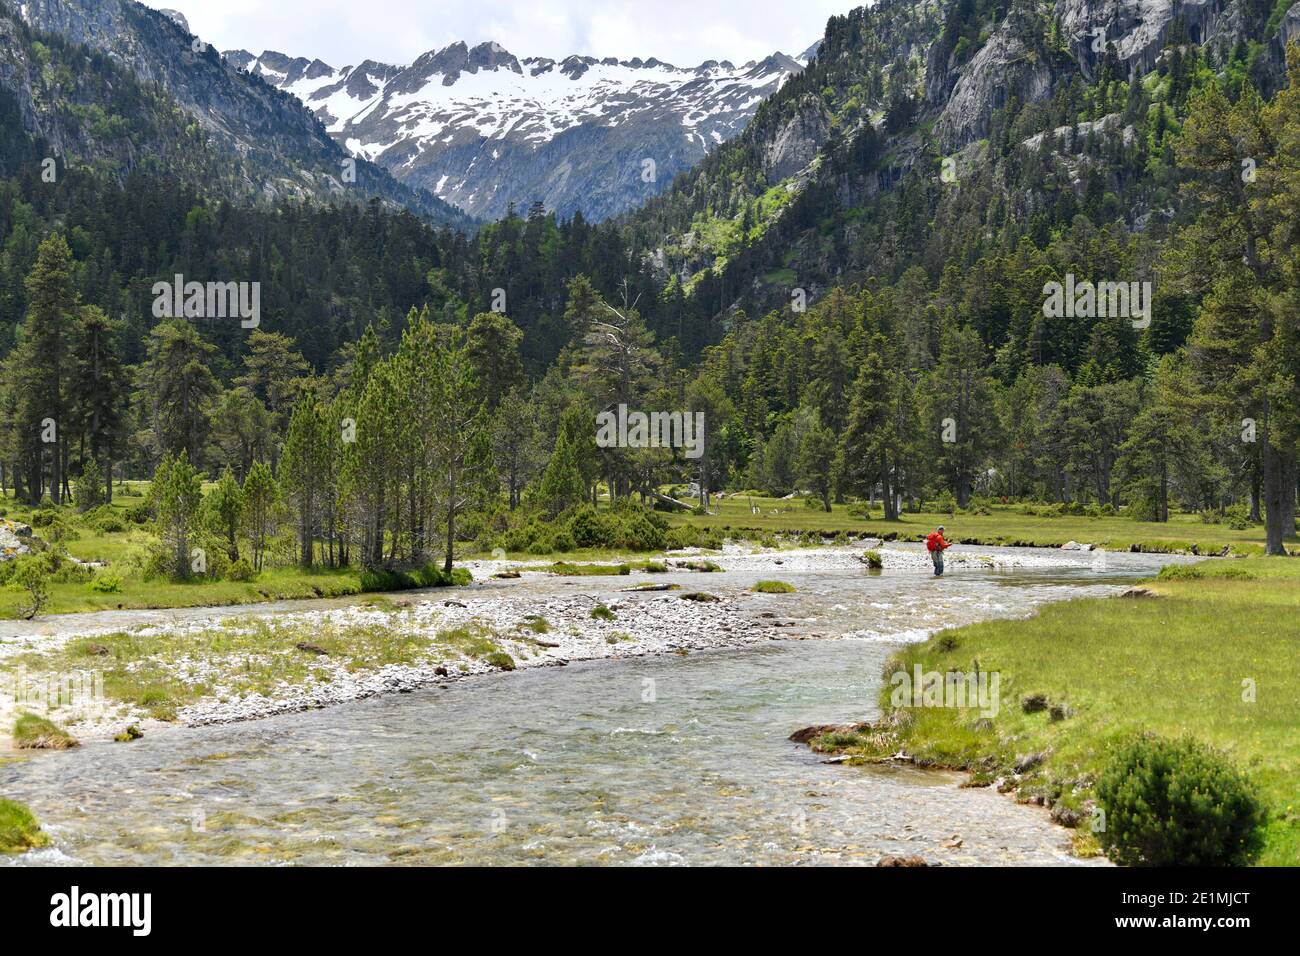 superb high mountain landscape in summer with a fly fisherman trout fishing Stock Photo